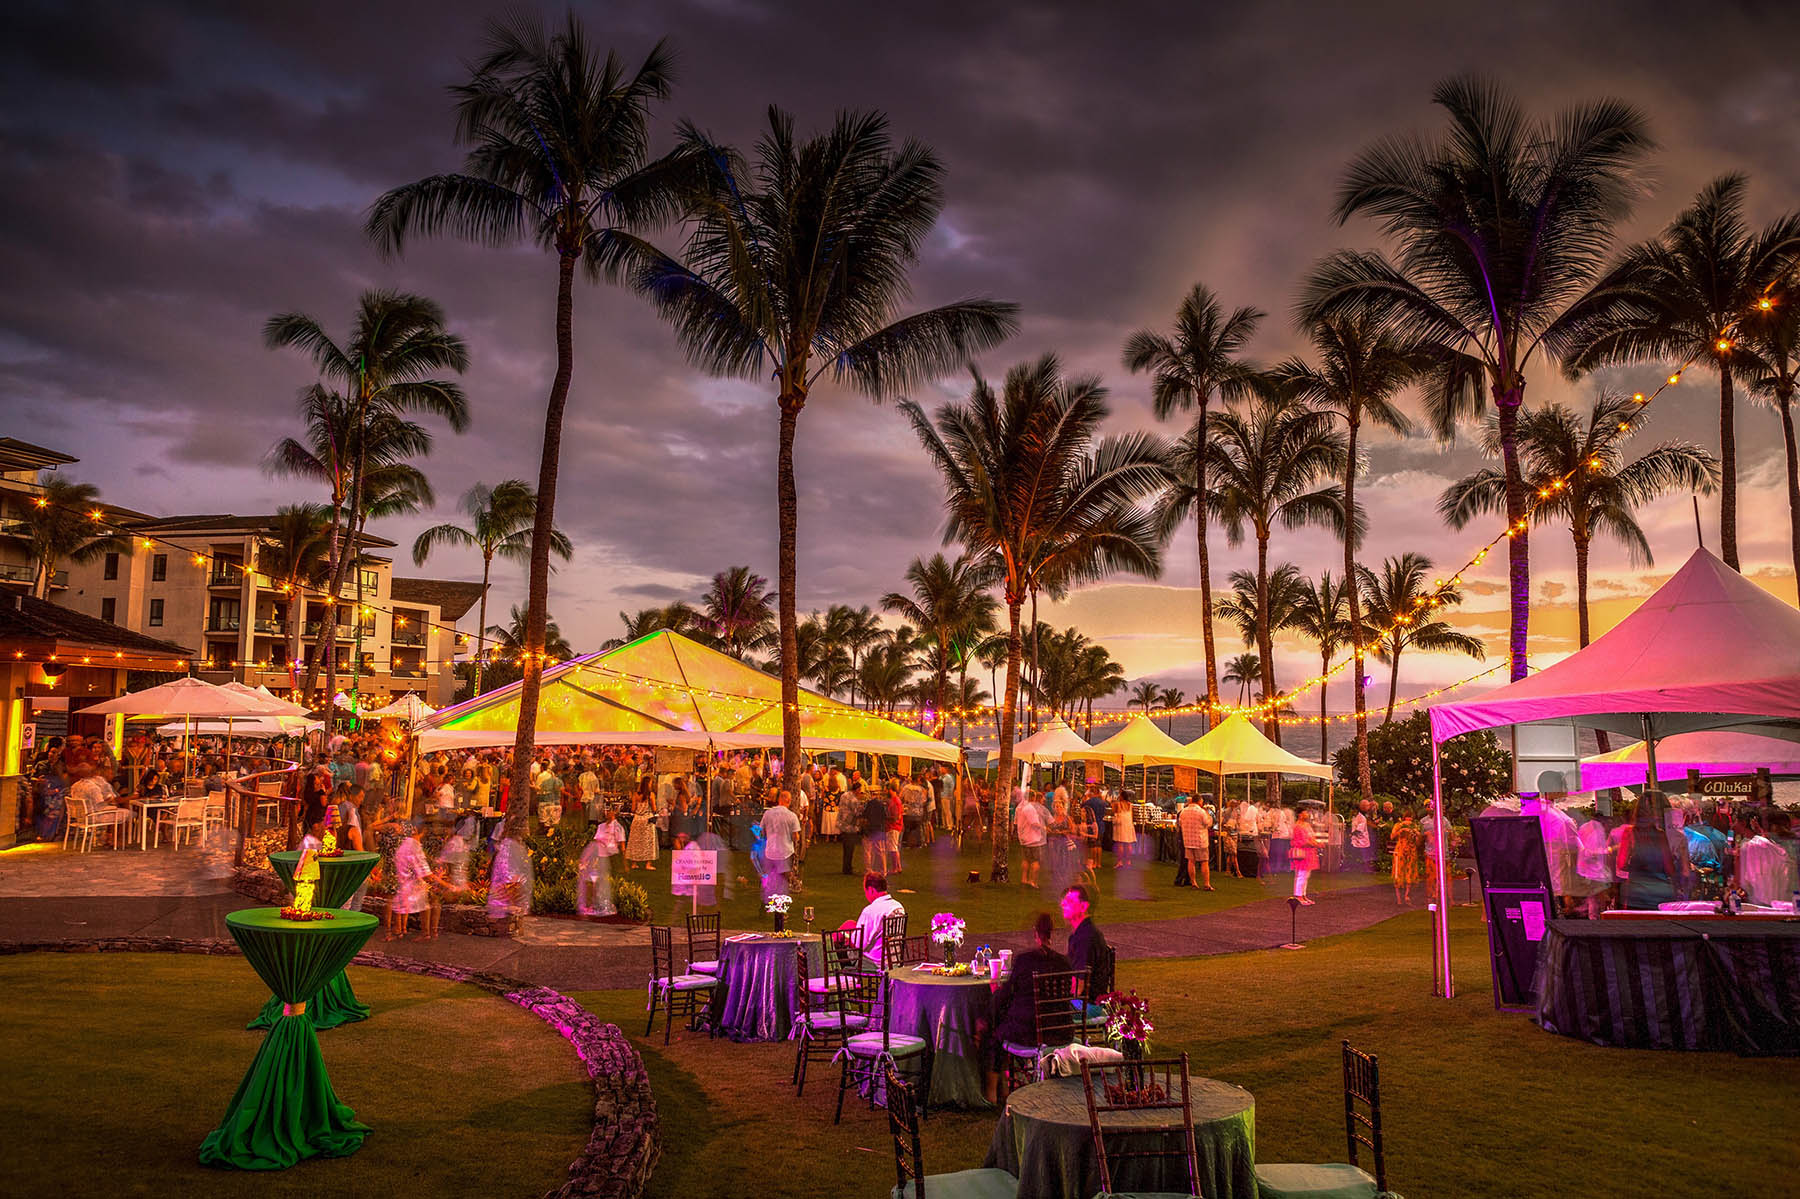 Kapalua Wine and Food Festival This celebration of the finest in food